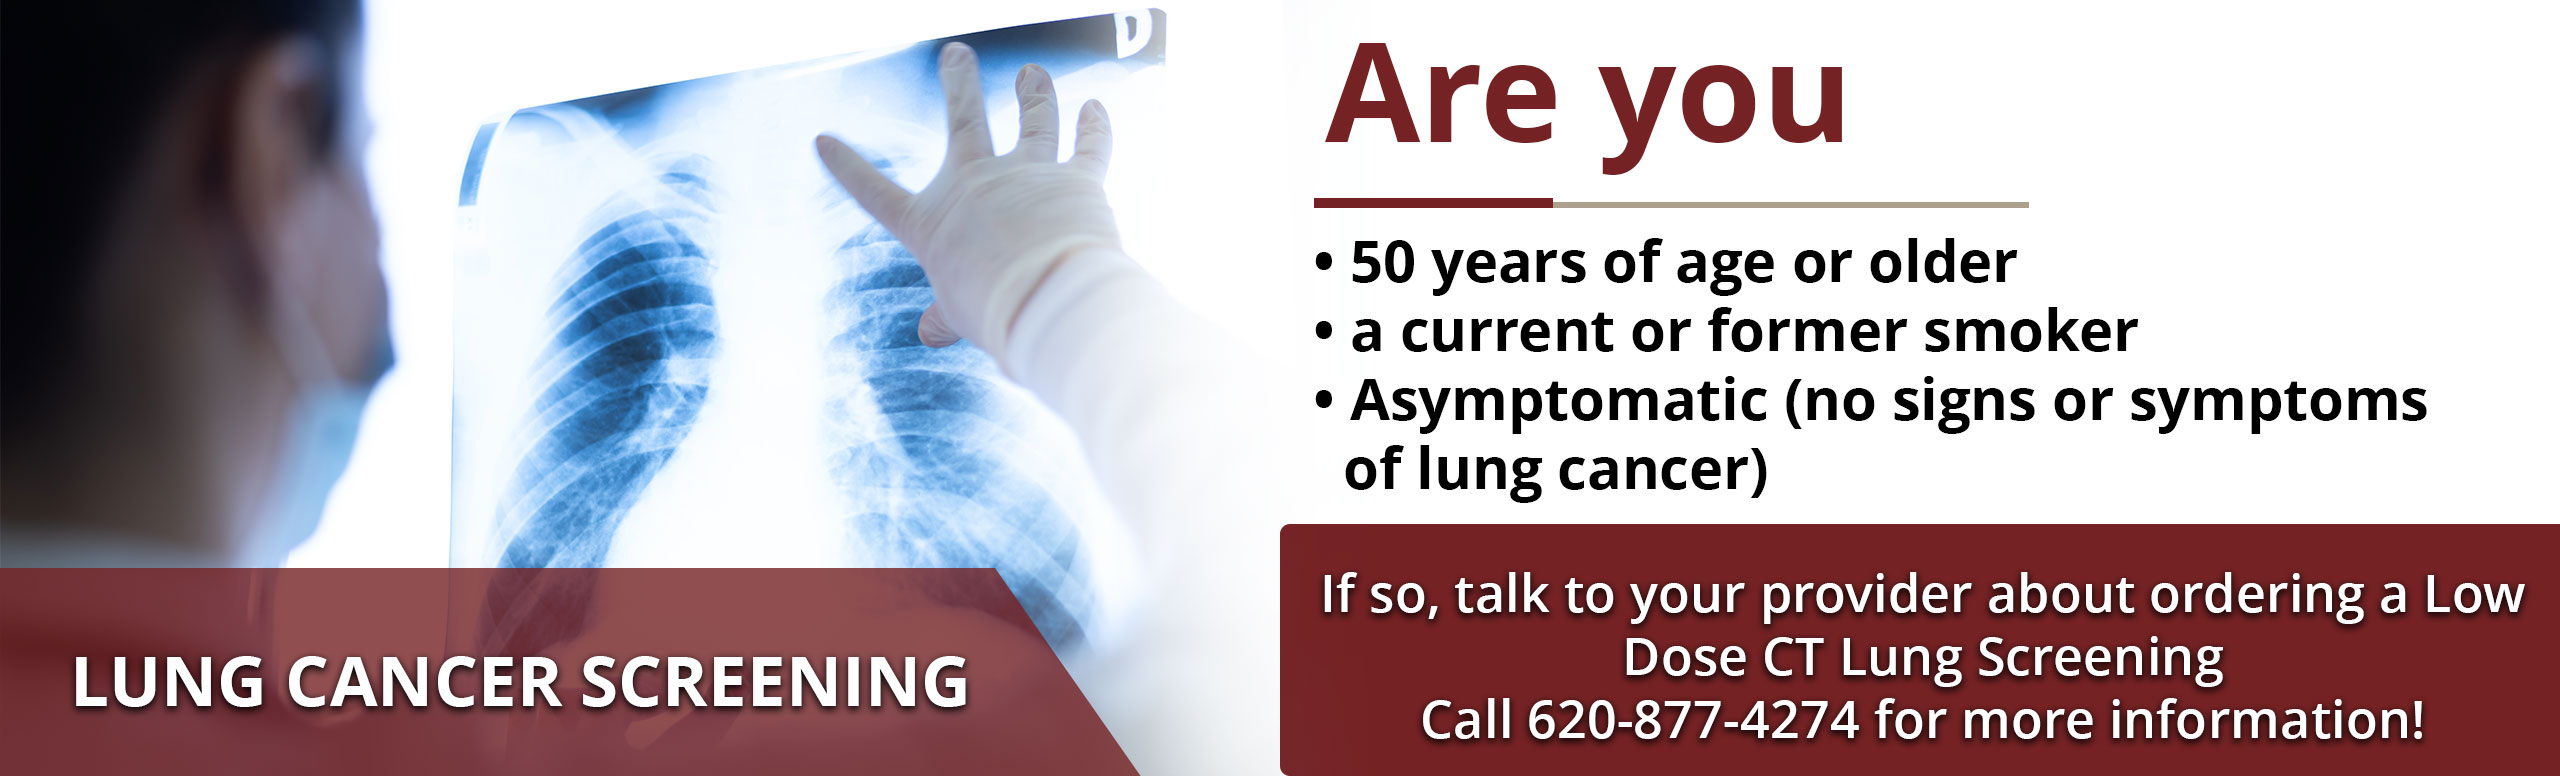 Lung Cancer Screening

Are you 50 years of age or older?
A current or former smoker?
Asymptomatic (no signs or symptoms of lung cancer)?

If so, talk to your provider about ordering a Low Dose CT Lung Screening. 

Call 620-877-4274 for more information!